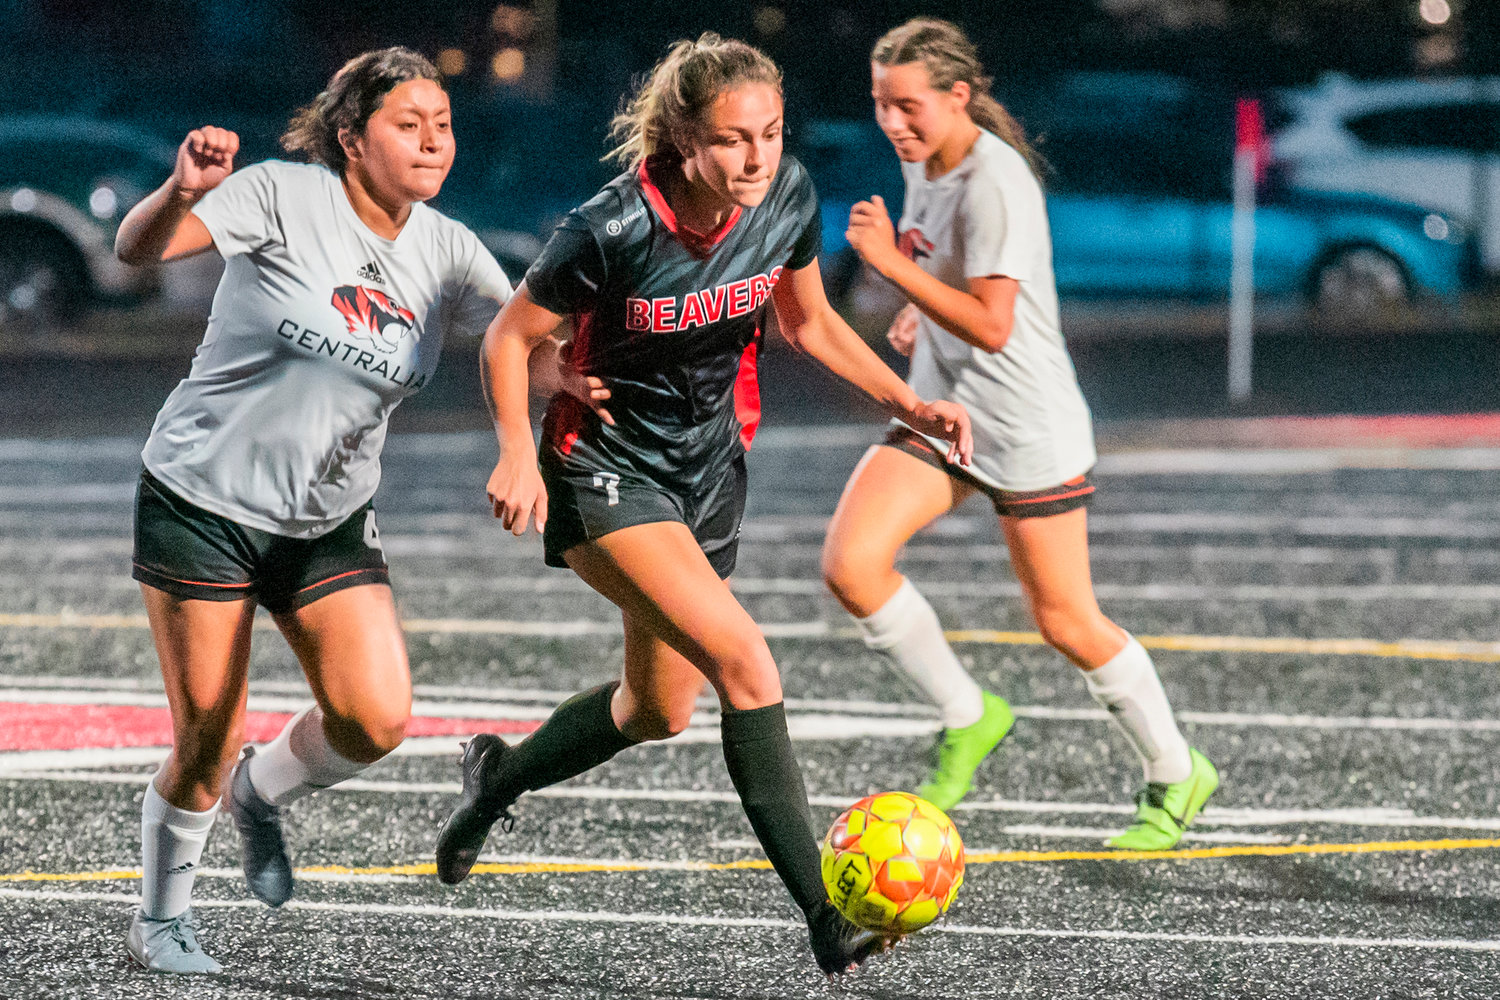 Tenino’s Emma Barr (7) weaves through defenders at Beaver Stadium Tuesday night during a game against Centralia.